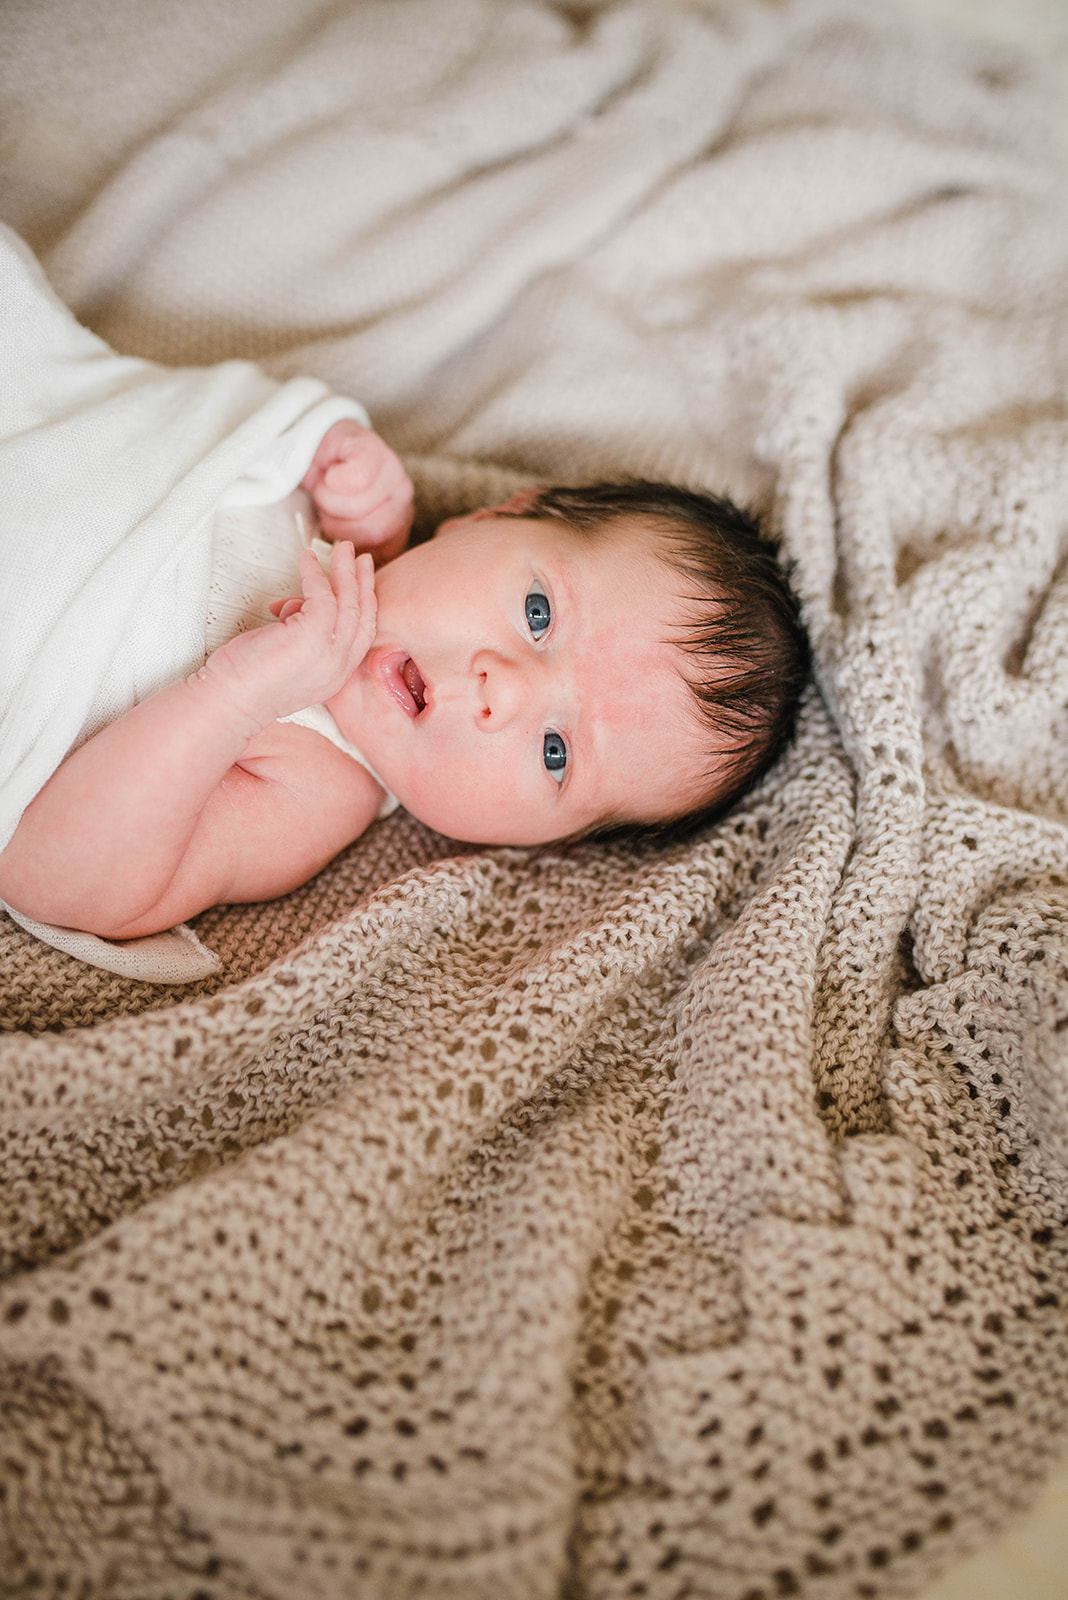 Photograph of newborn baby wraped and laying on a bed 